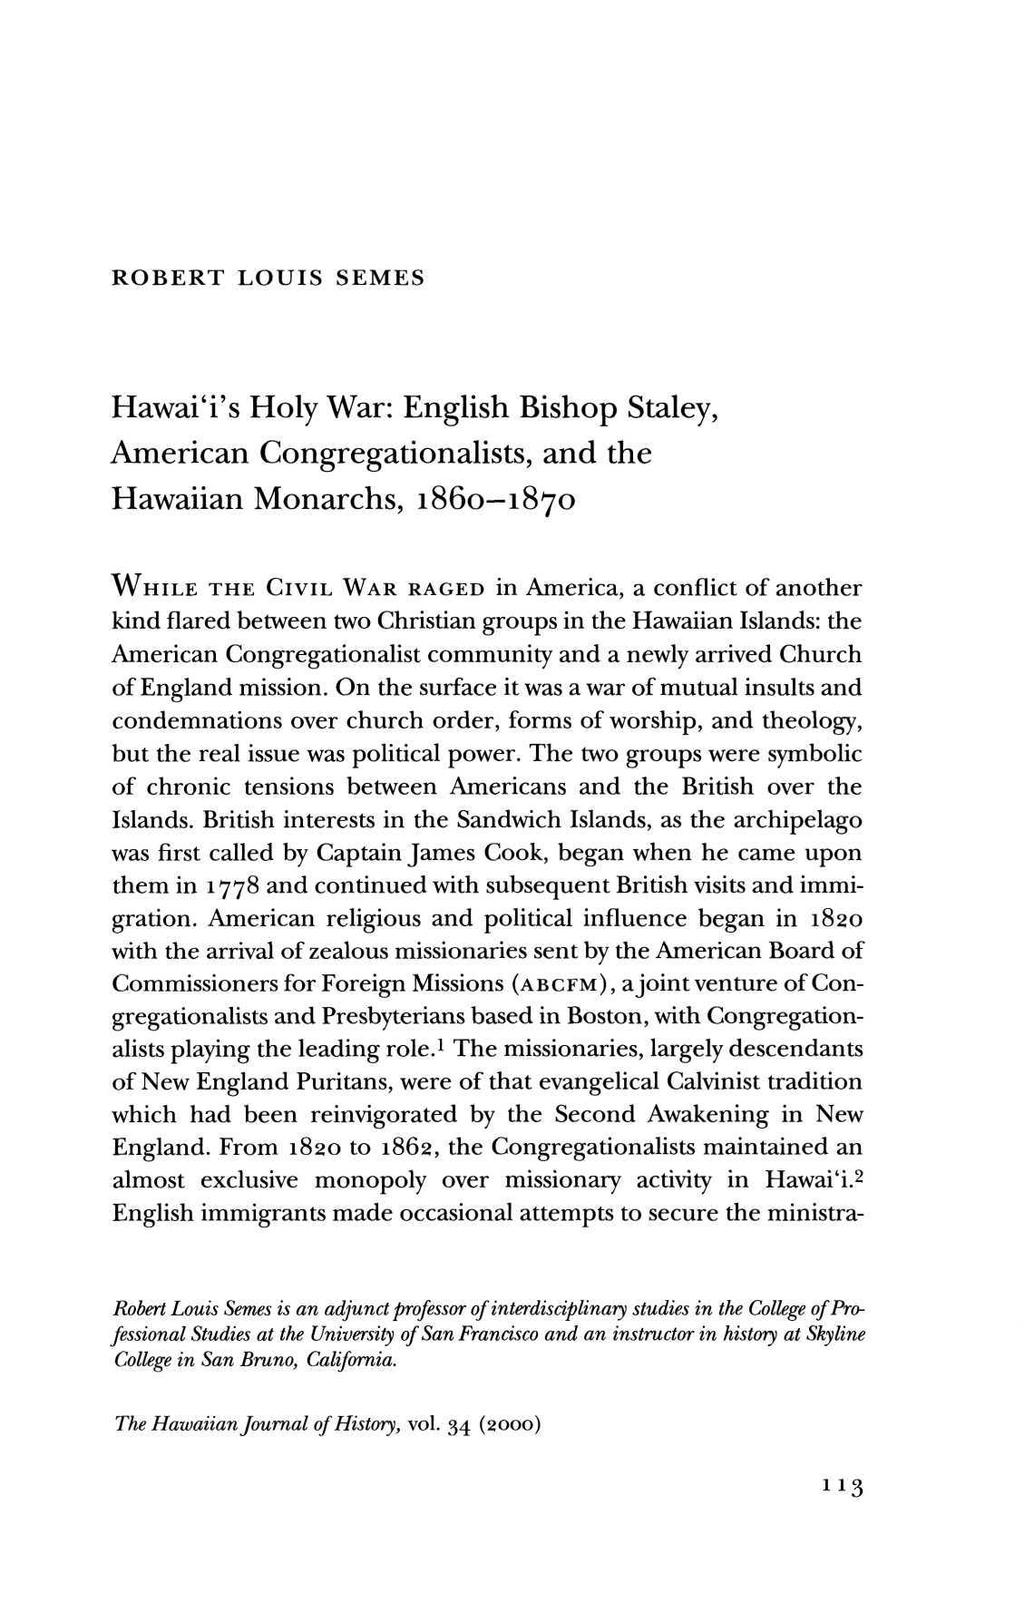 ROBERT LOUIS SEMES Hawai'i's Holy War: English Bishop Staley, American Congregationalists, and the Hawaiian Monarchs, 1860-1870 WHILE THE CIVIL WAR RAGED in America, a conflict of another kind flared